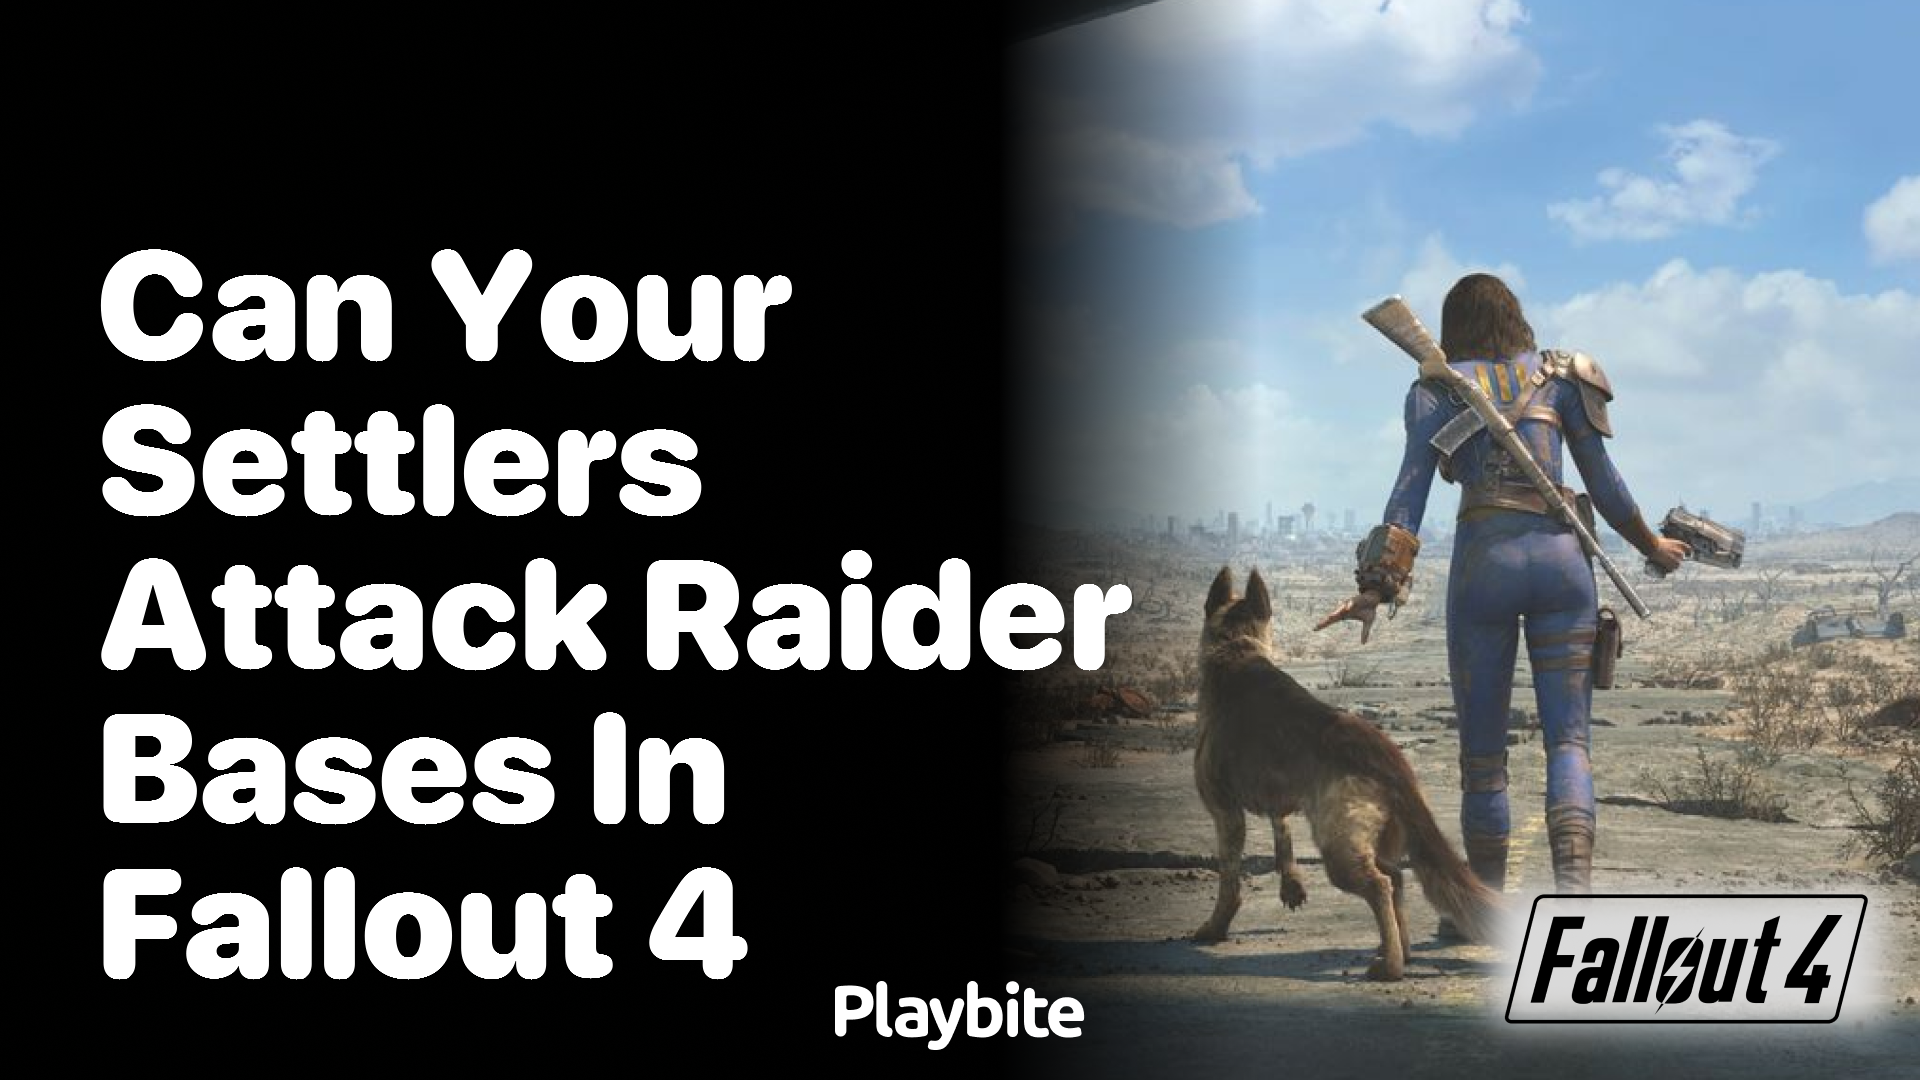 Can Your Settlers Attack Raider Bases in Fallout 4?